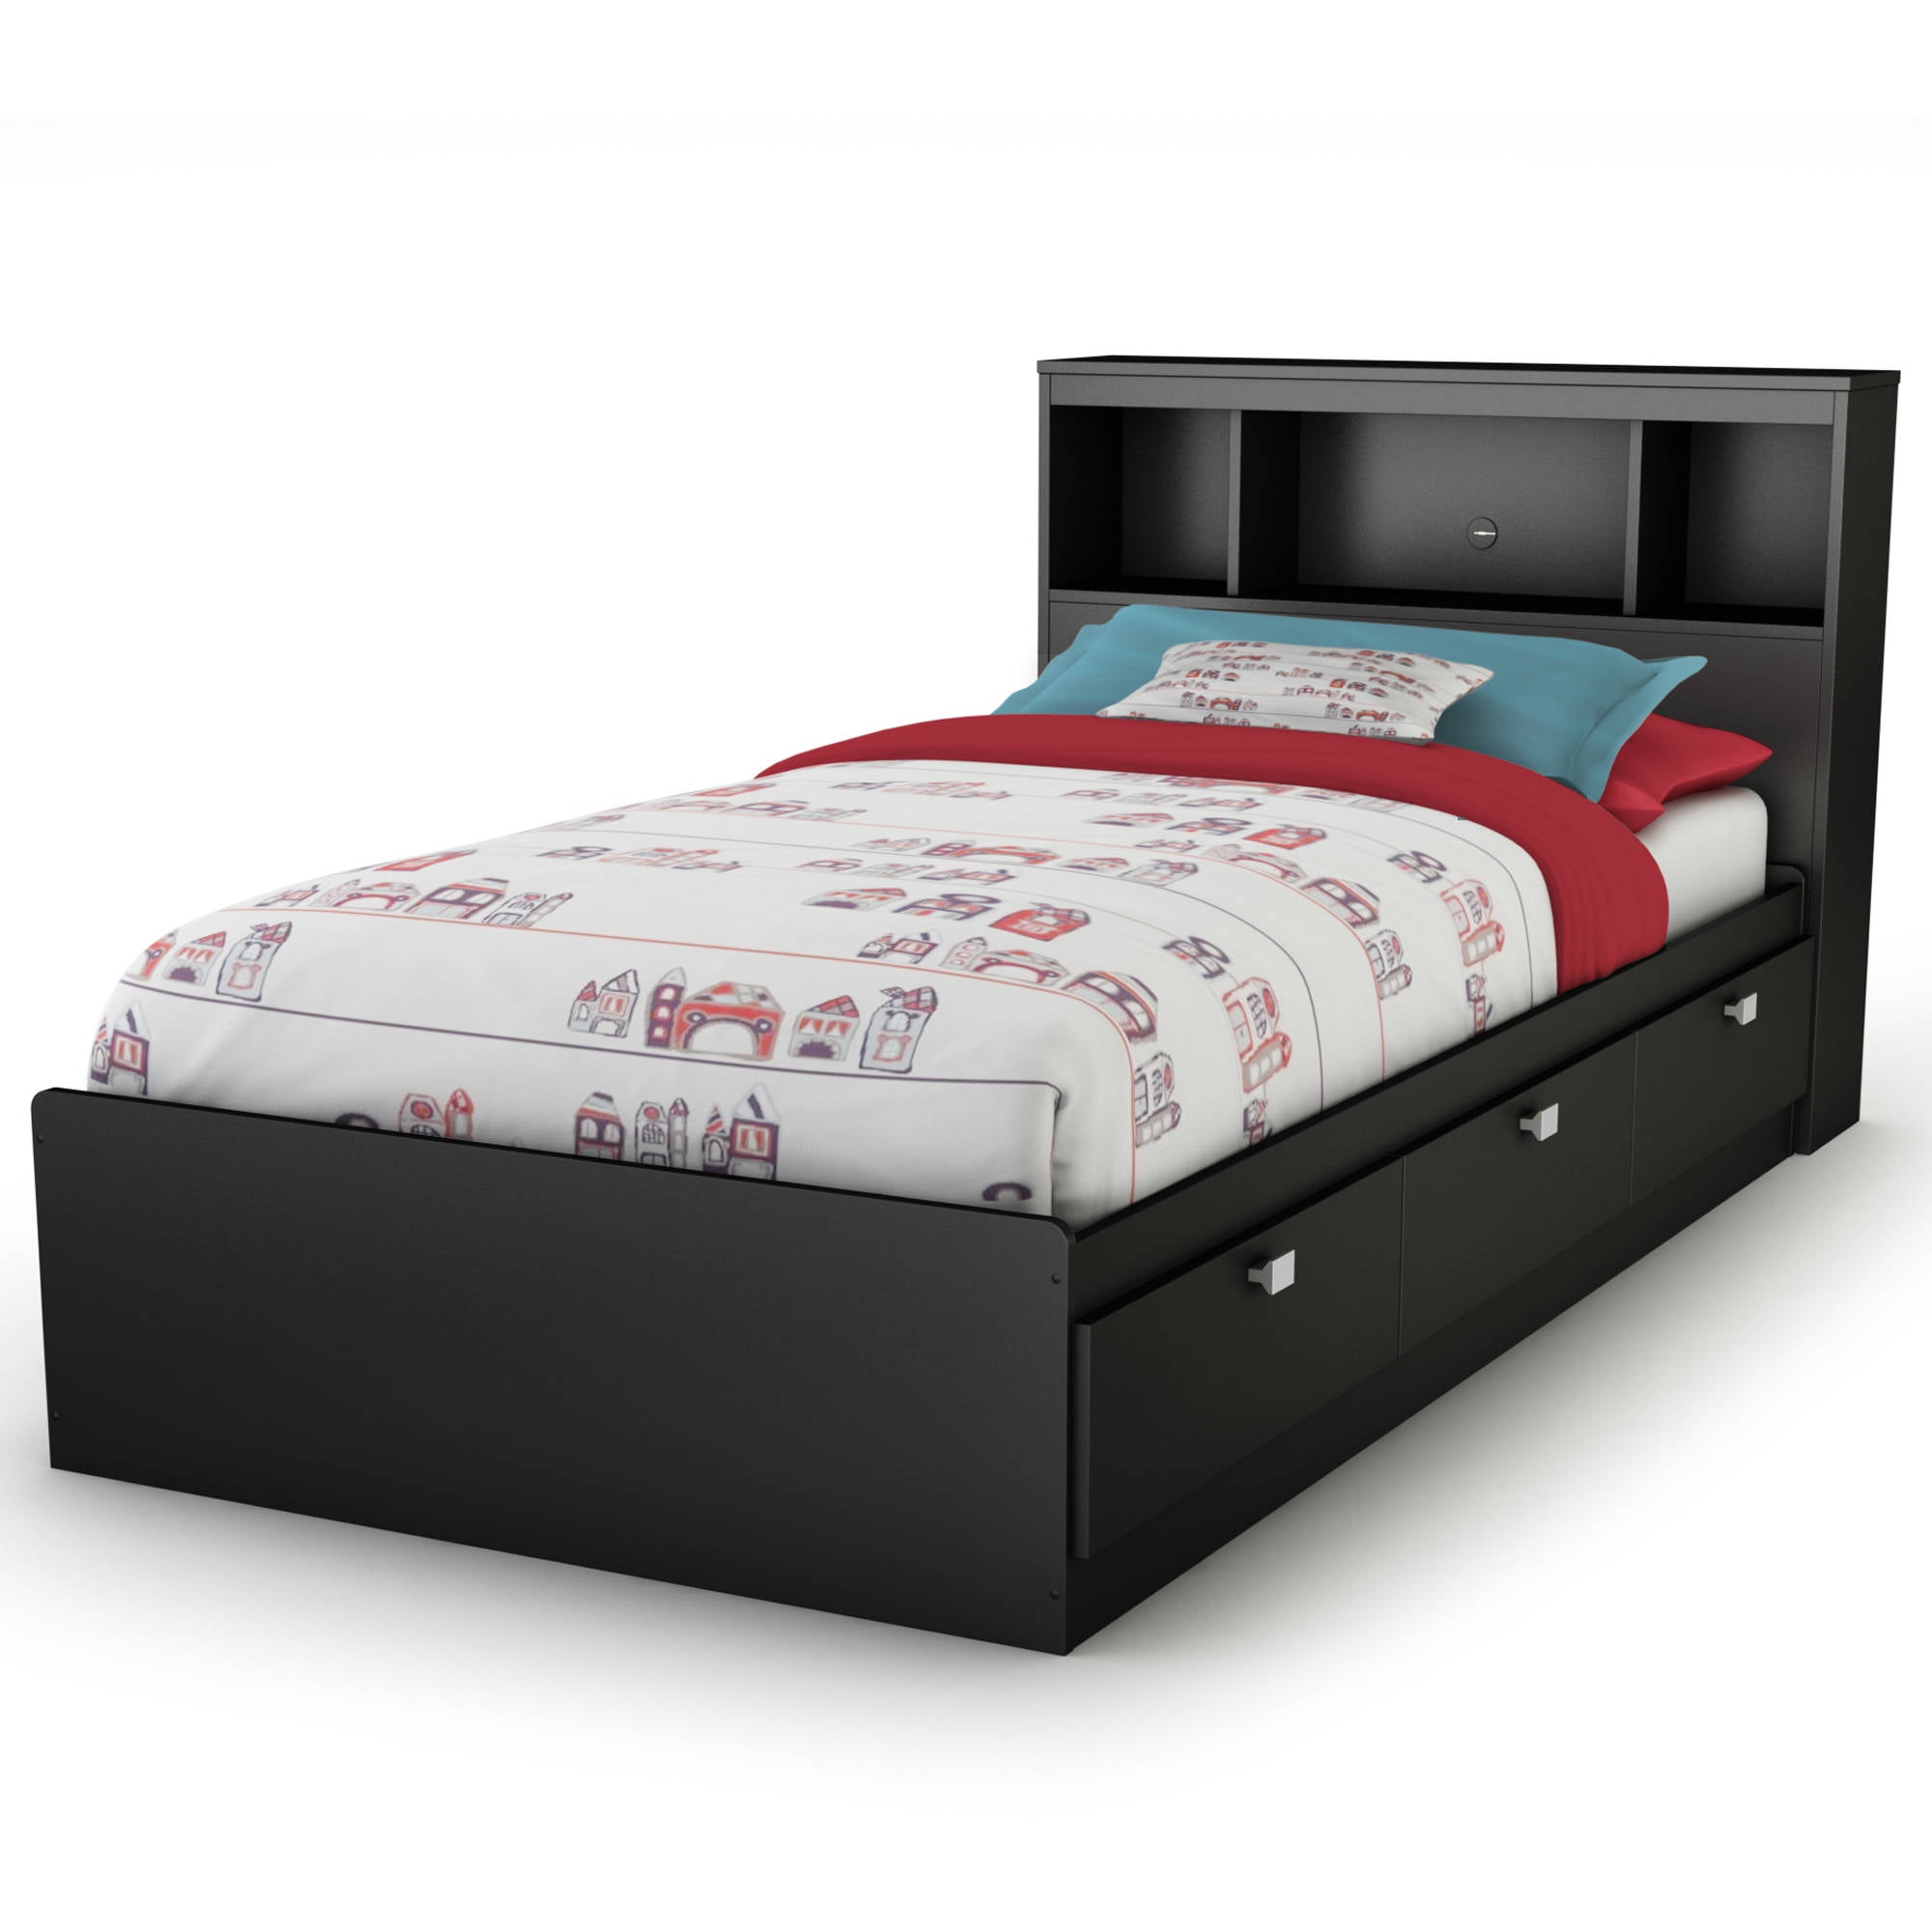 South S Spark 3 Drawer Storage Bed, Twin Bed Headboard Size